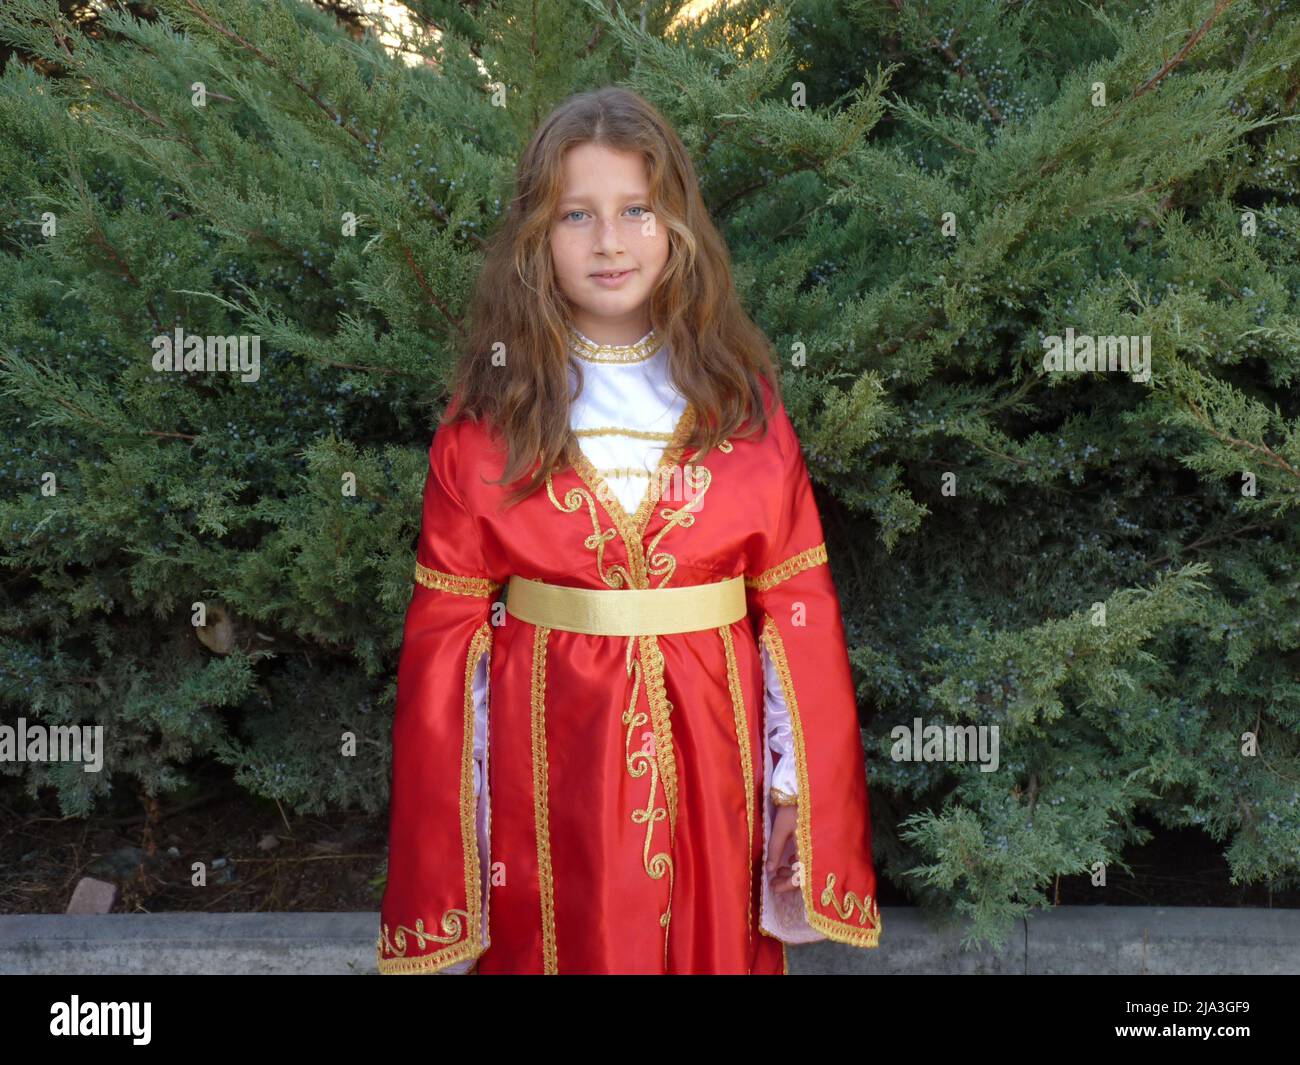 blue-eyed wavy-haired turkish girl in a folklore outfit Stock Photo